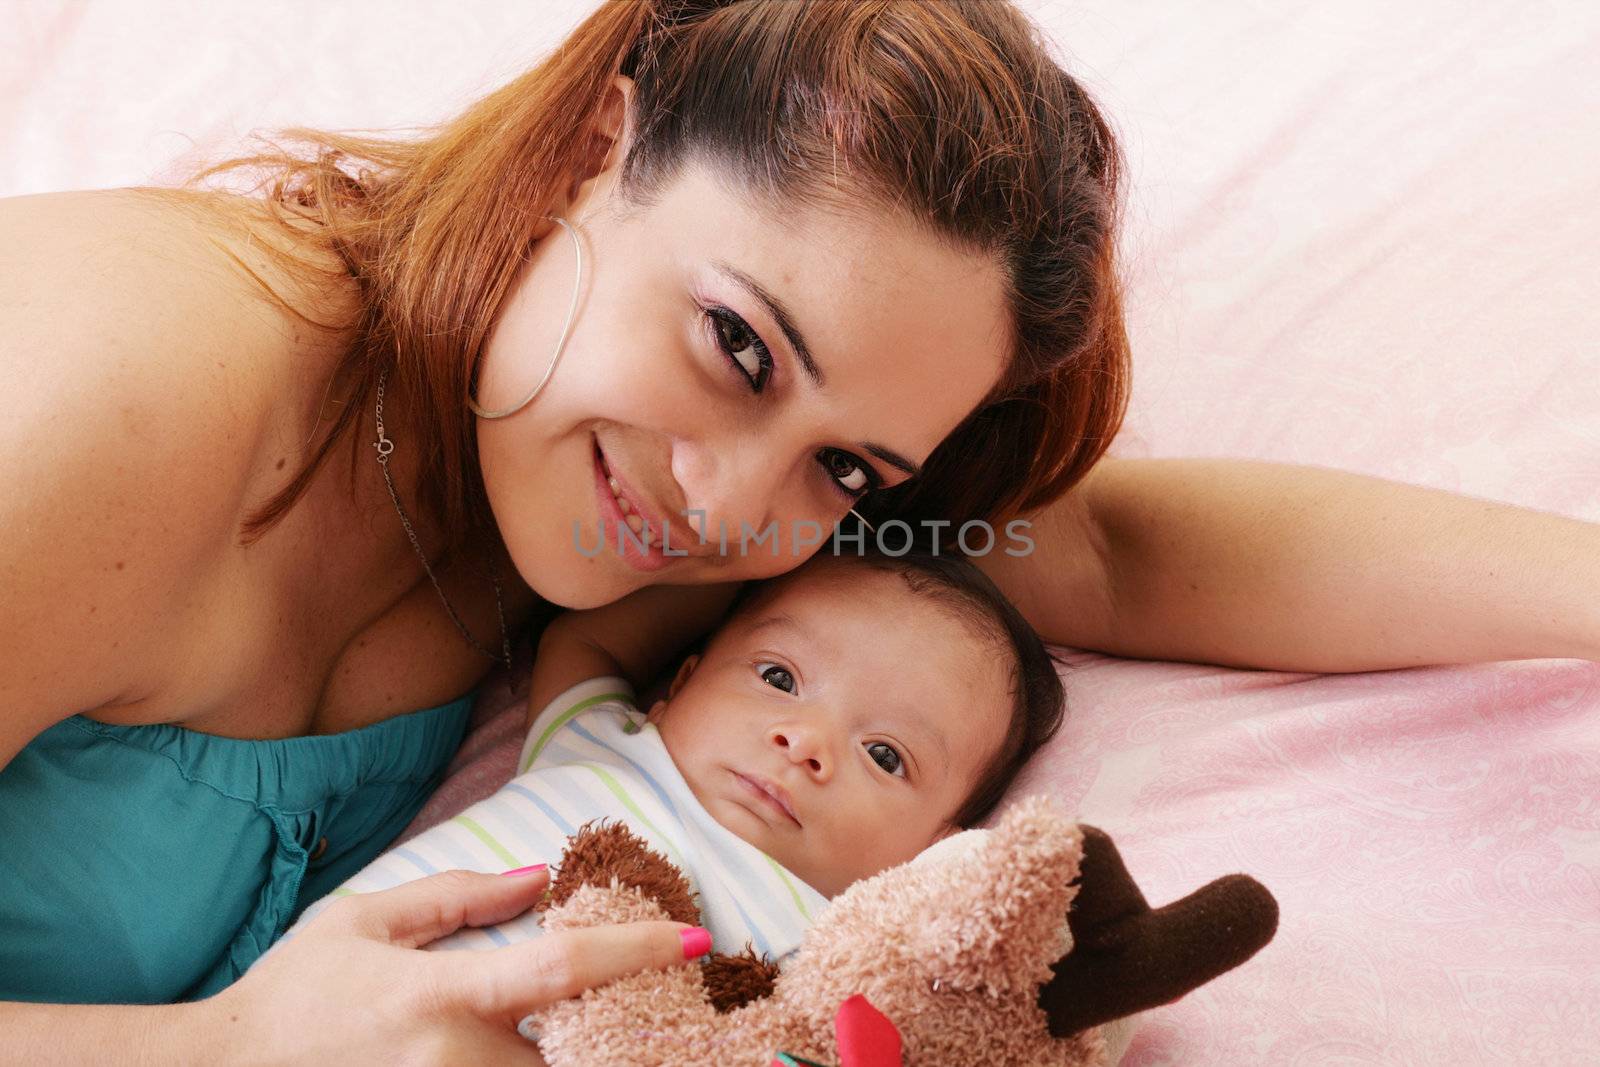 Happy mum and baby boy smiling in the bed holding teddy bear